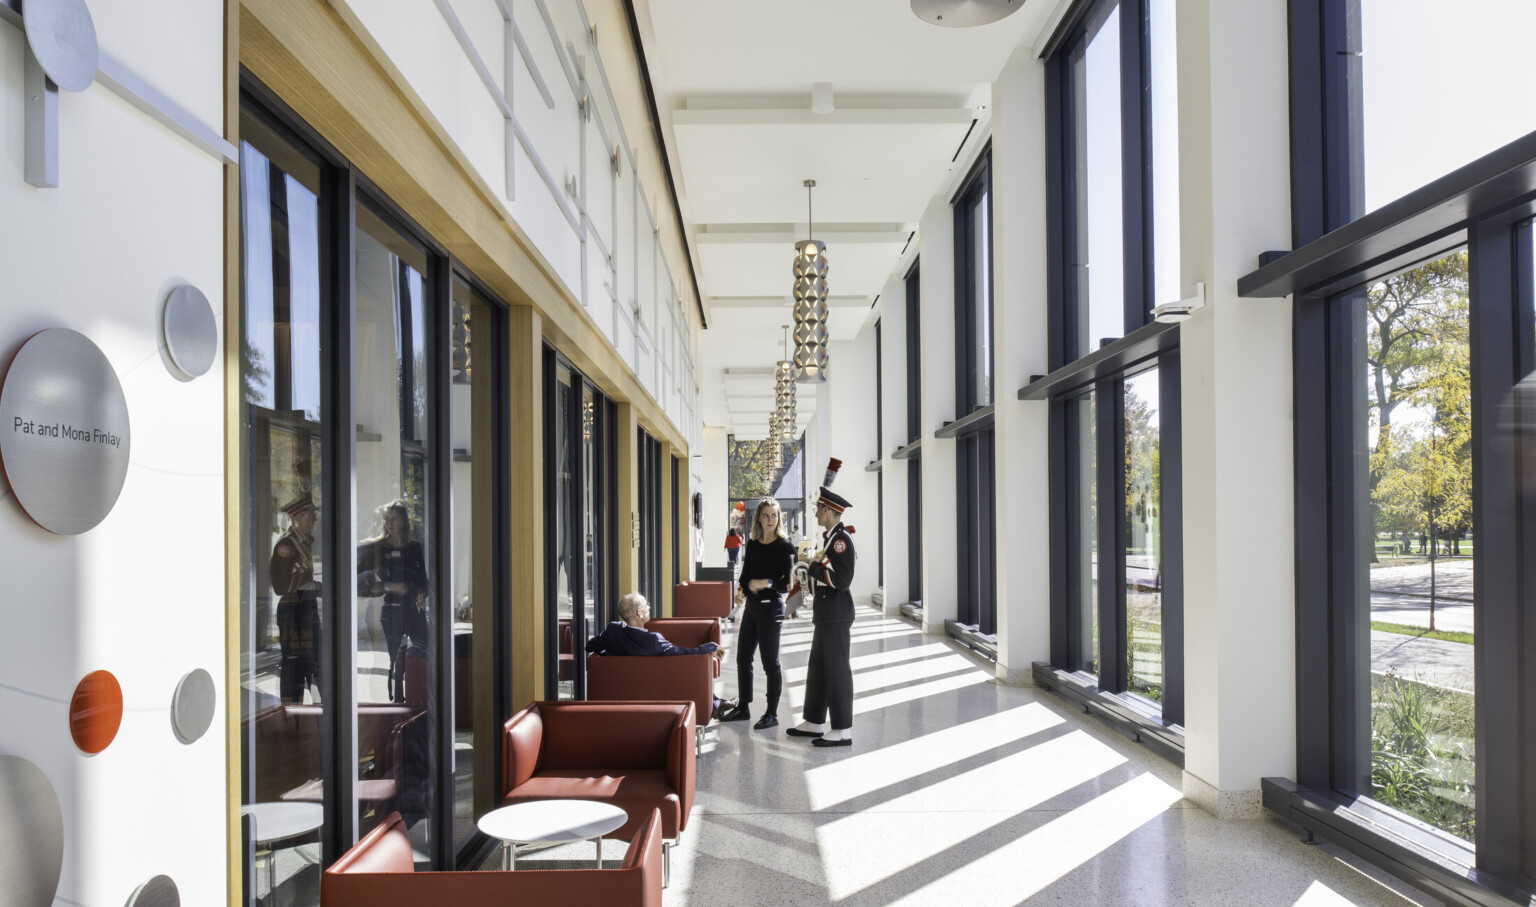 View of double height hallway with floor to ceiling windows to courtyard with red seating, metal pendant lights, and students conversing